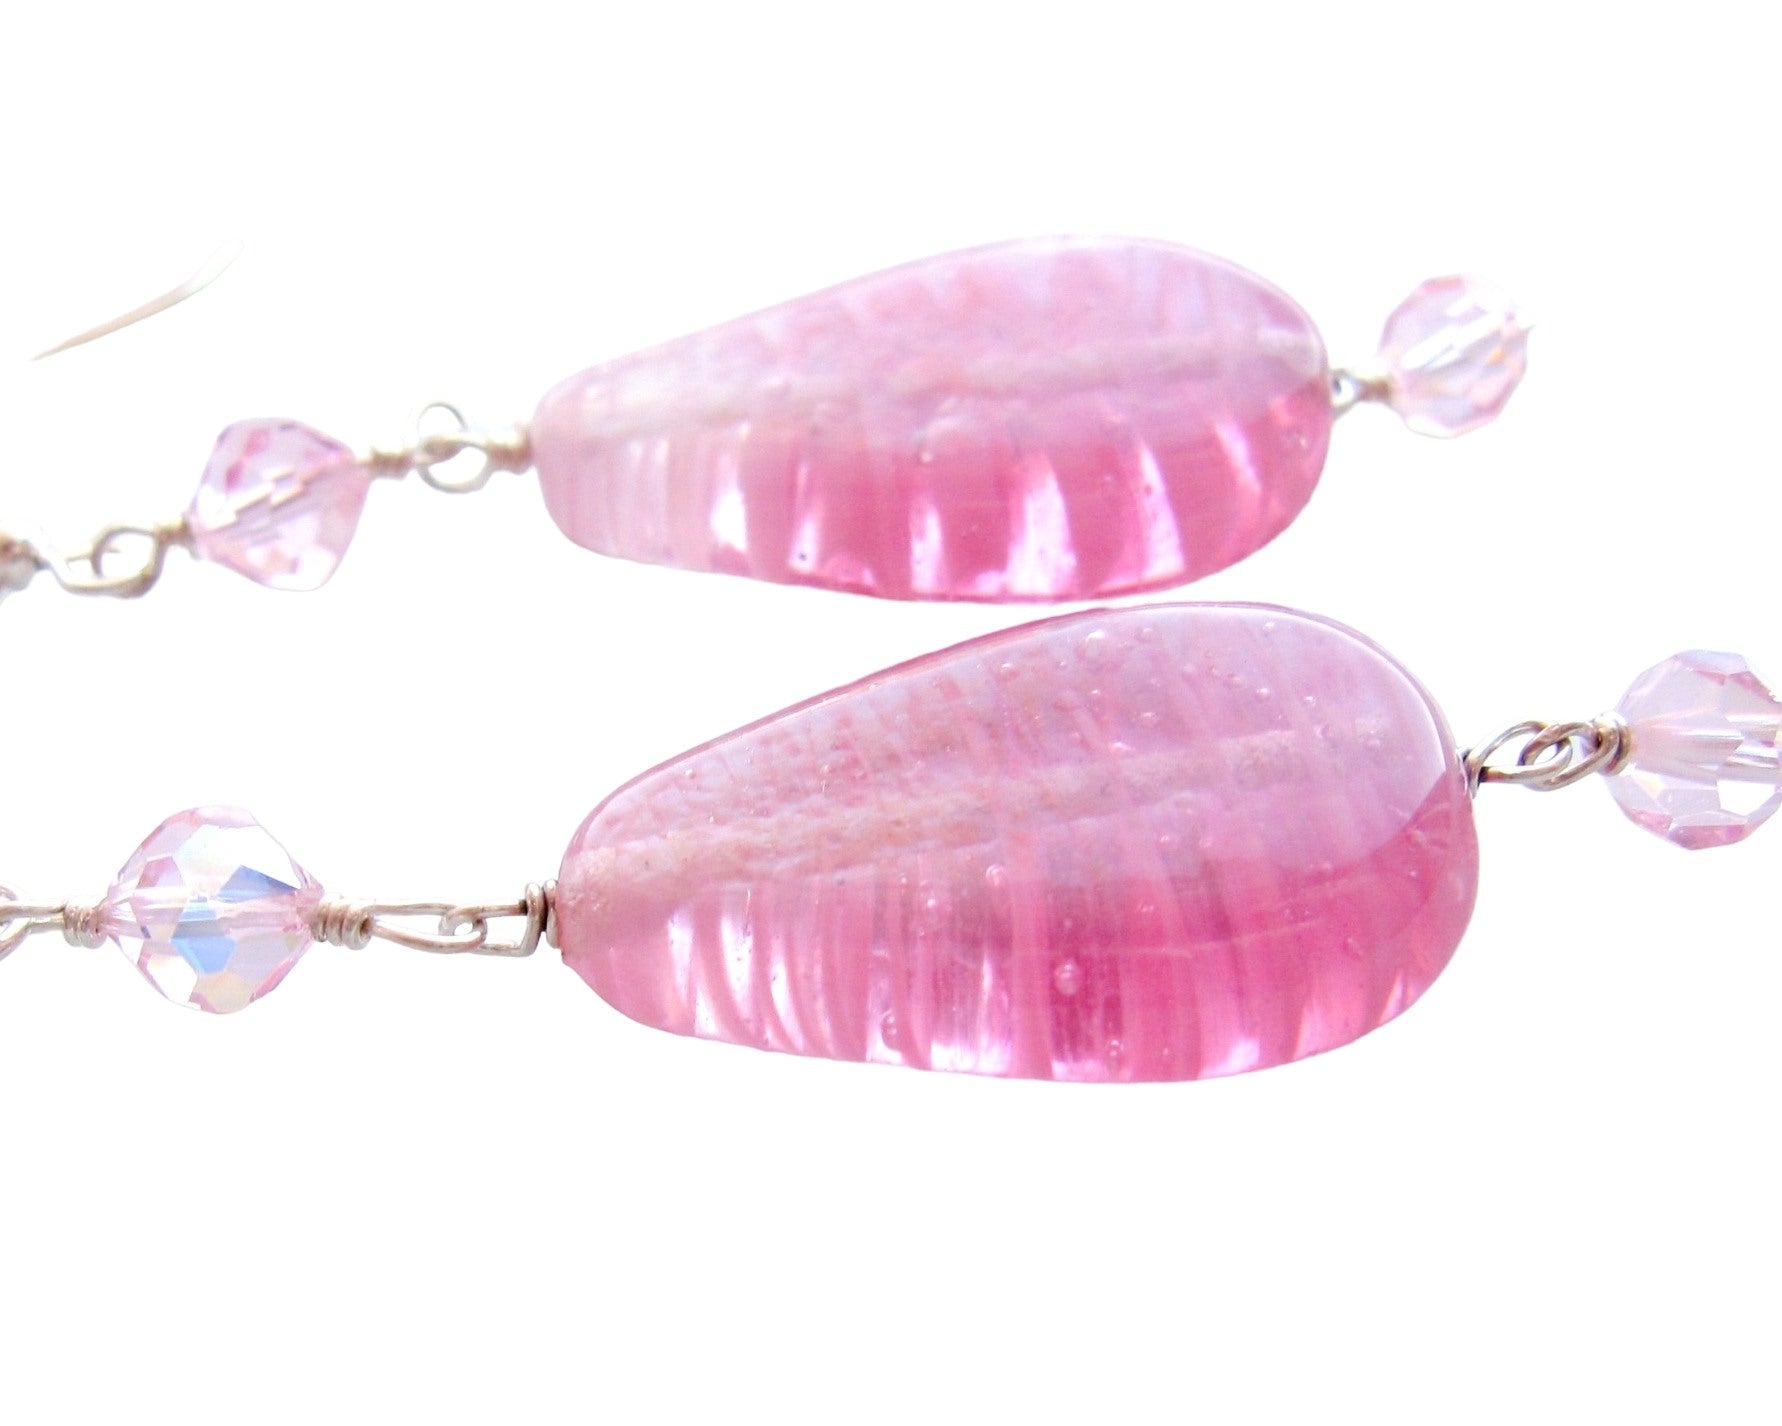 Art Deco style, long pink glass, and crystal earrings